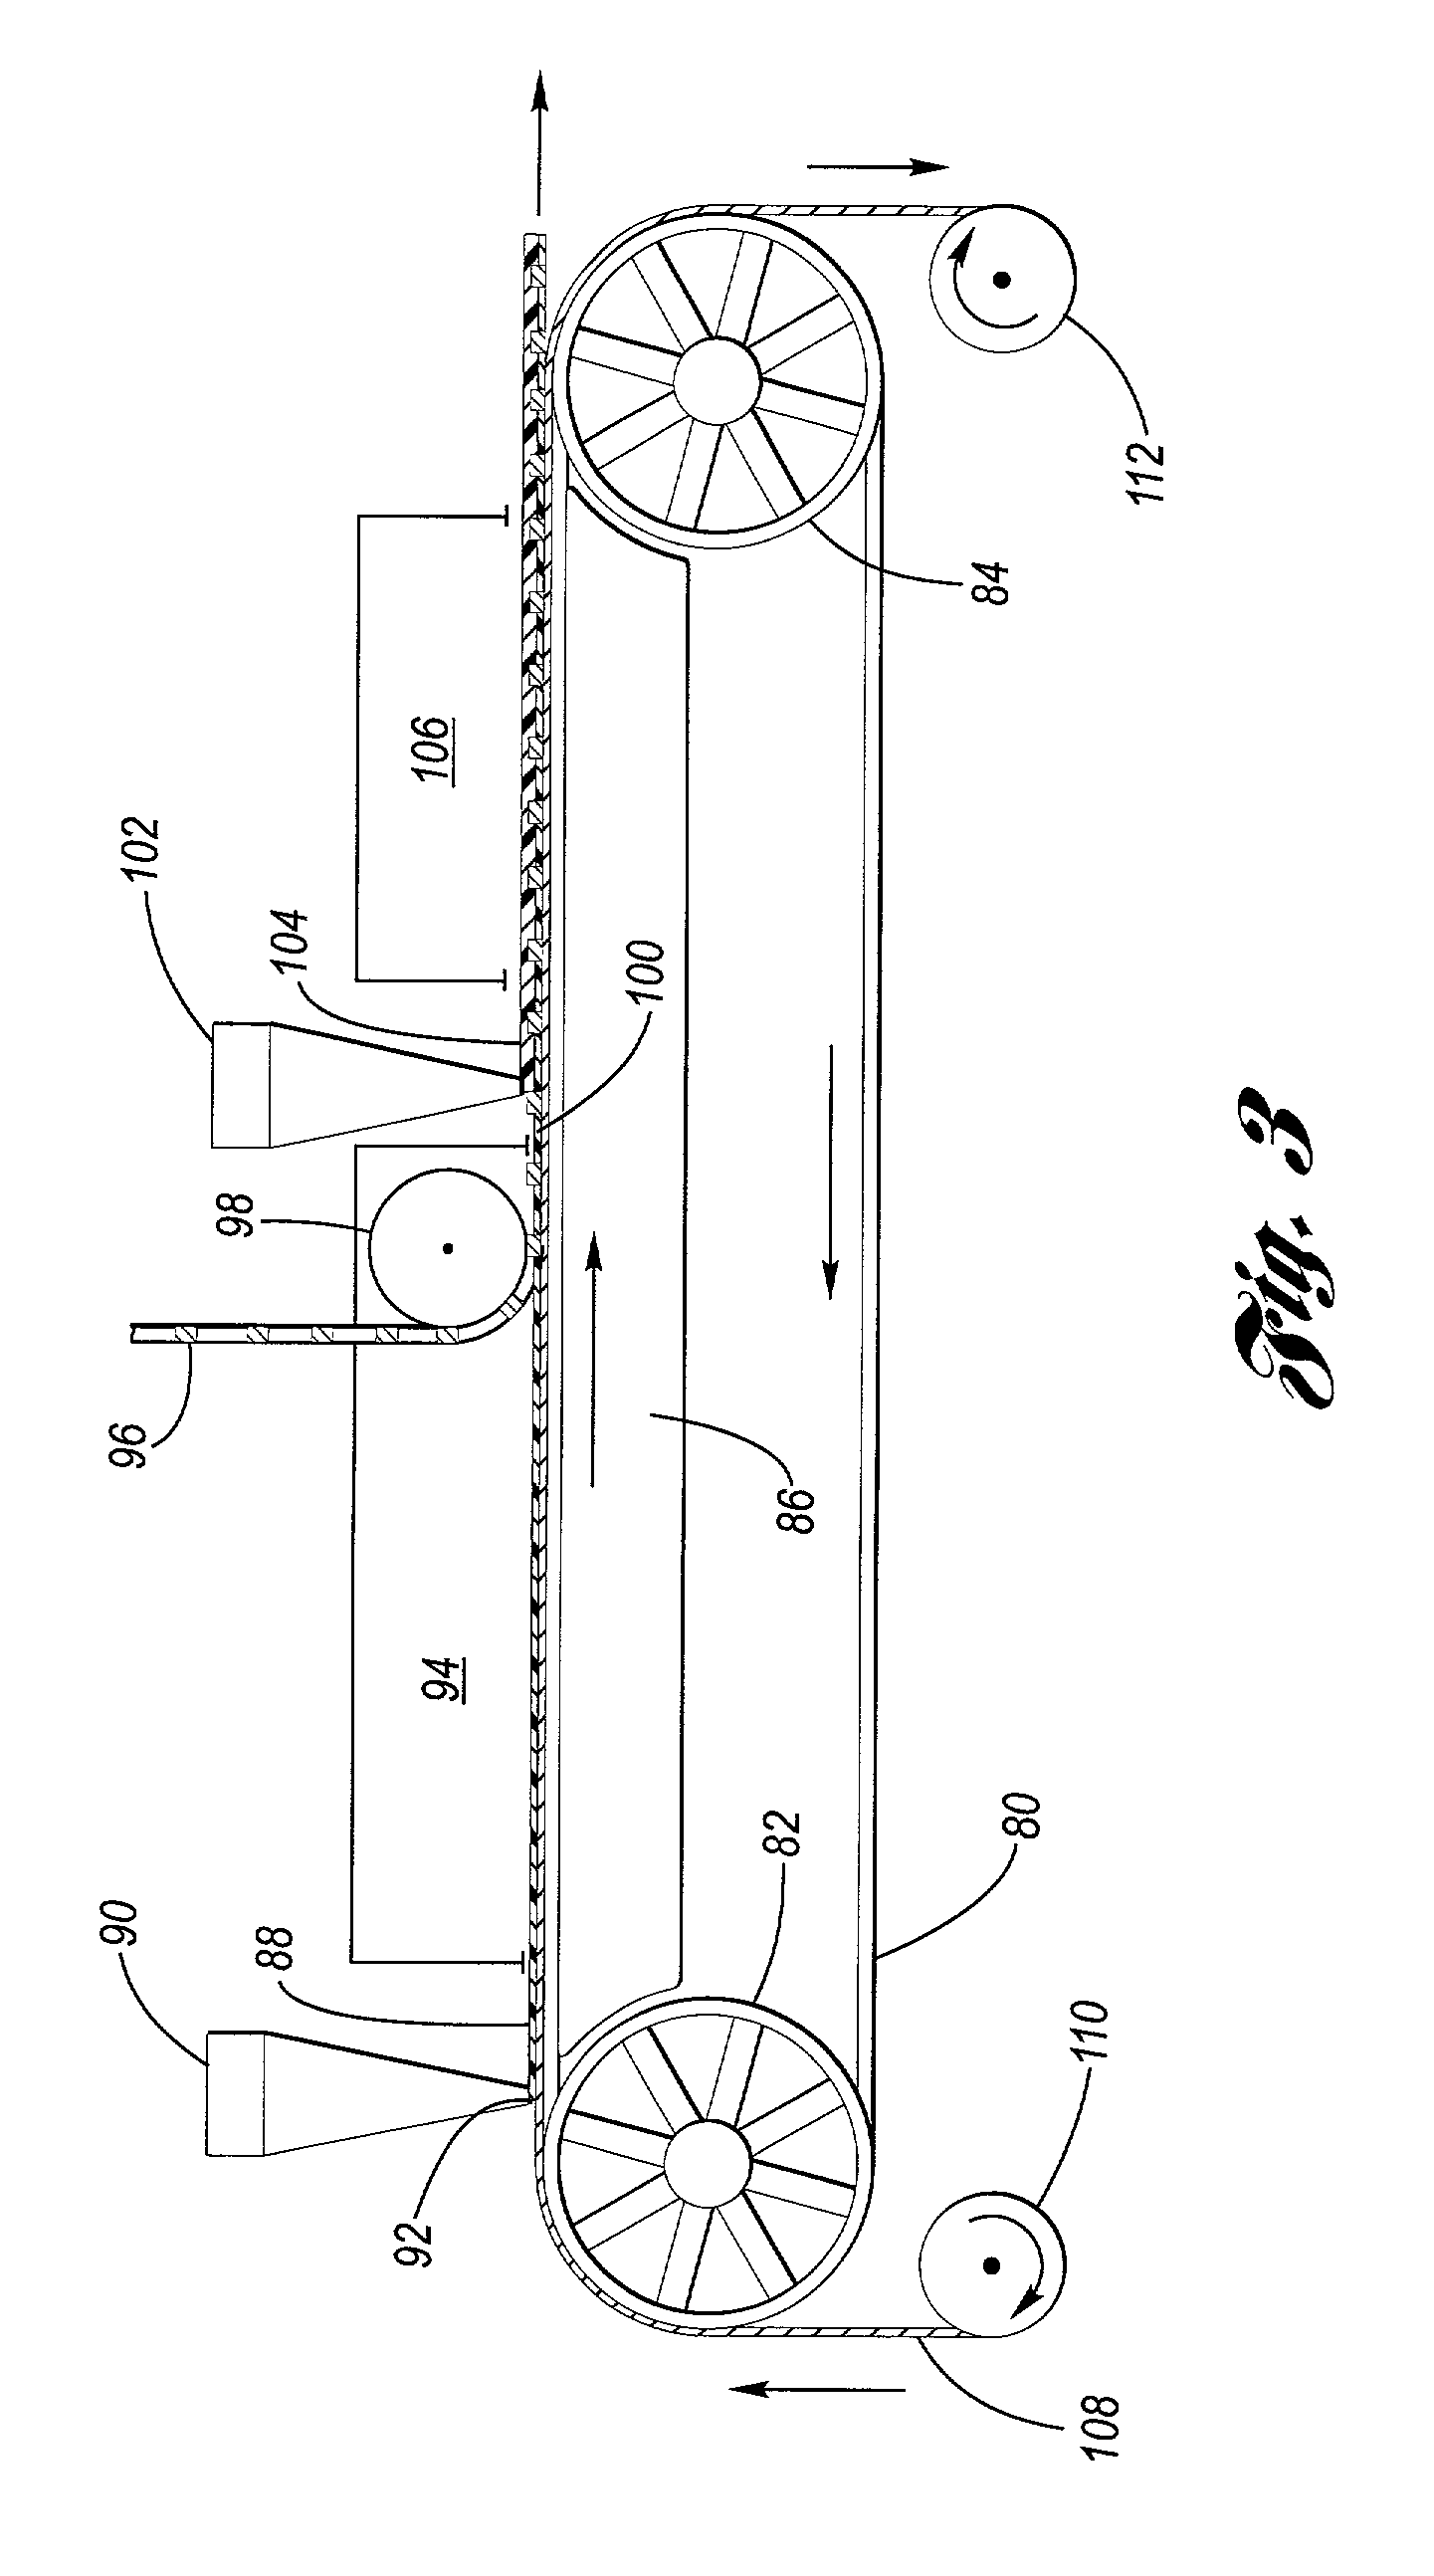 System and method for multilayer fabrication of lithium polymer batteries and cells